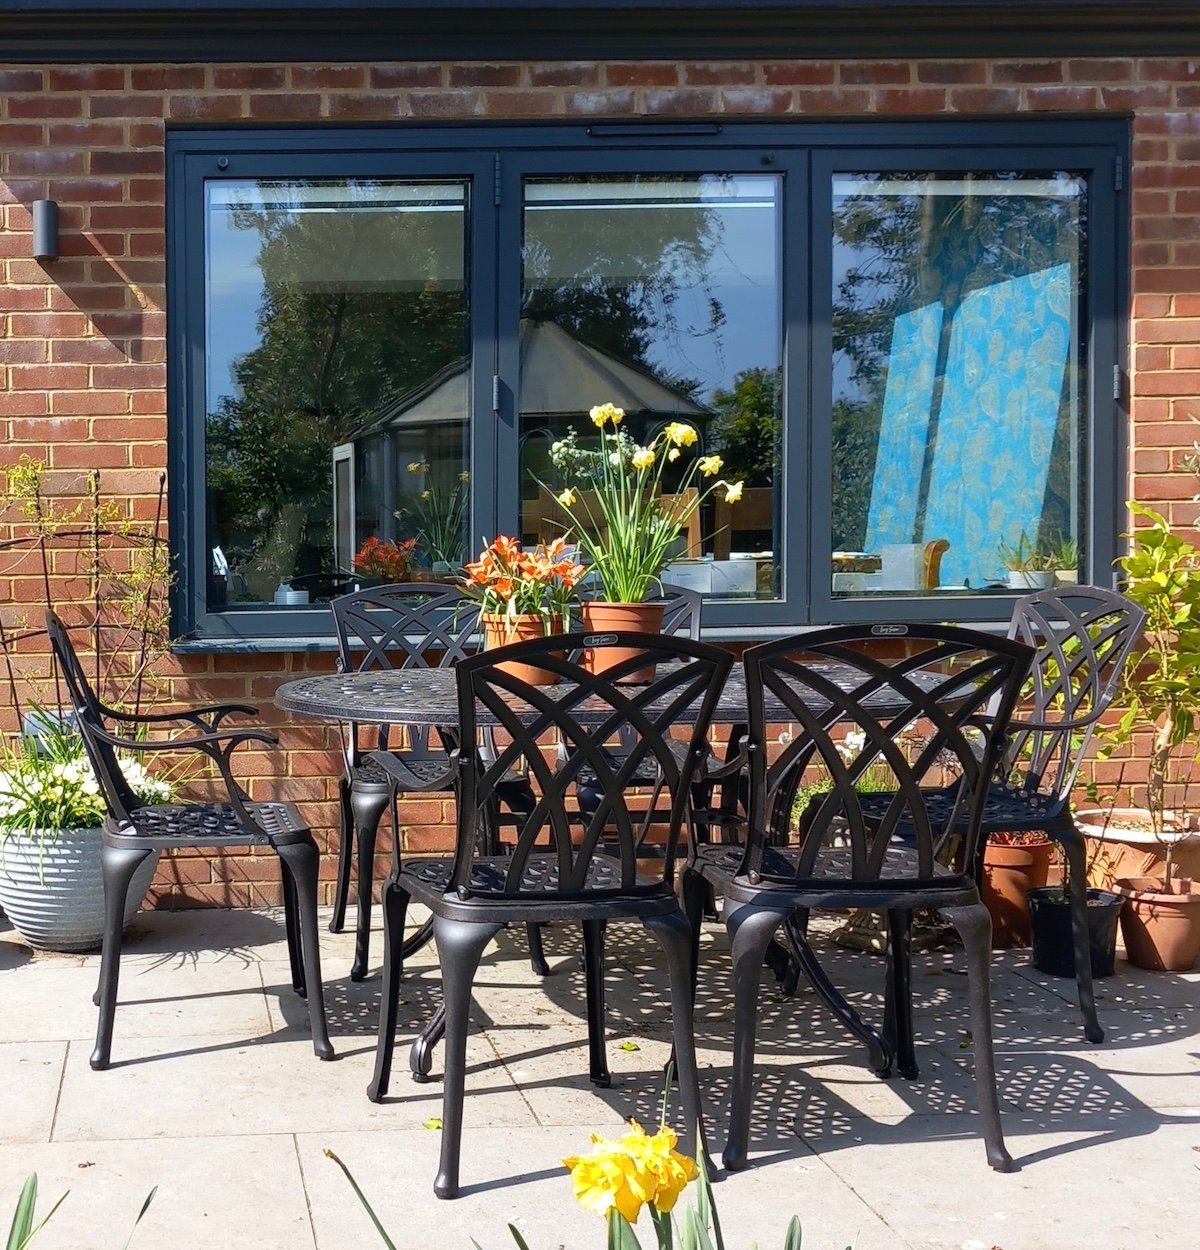 When is the best time to buy new garden furniture for your outdoor space?